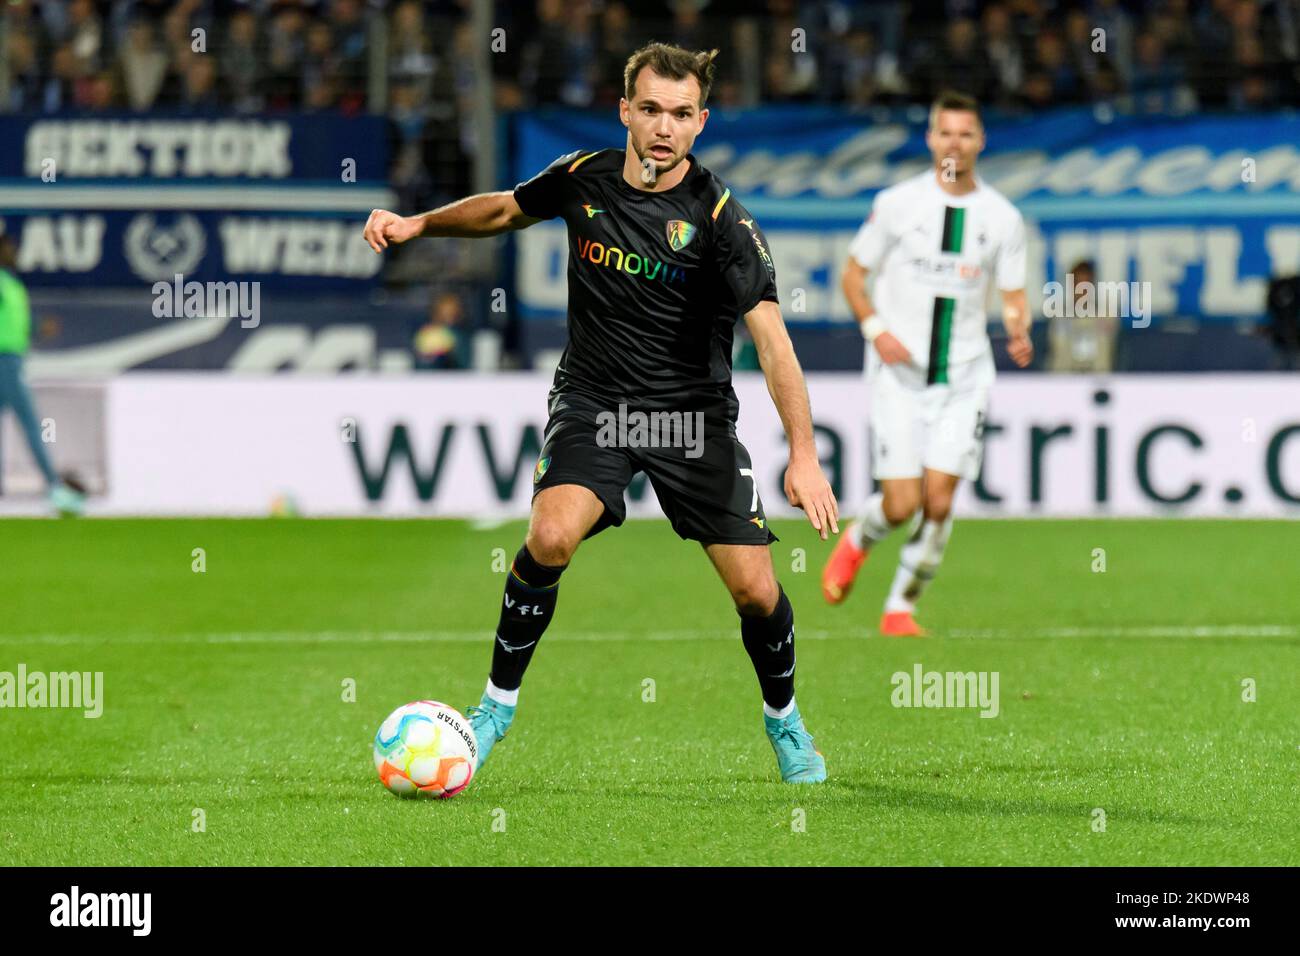 Kevin STOEGER (St?ger)(BO) with ball, single action with ball, action, full length, whole figure, whole figure, cut out, single image, single player, single action, football 1st Bundesliga, 14th matchday, VfL Bochum (BO ) - Borussia Monchengladbach (MG) 2: 1, on November 8th, 2022 in Bochum/Germany. Stock Photo